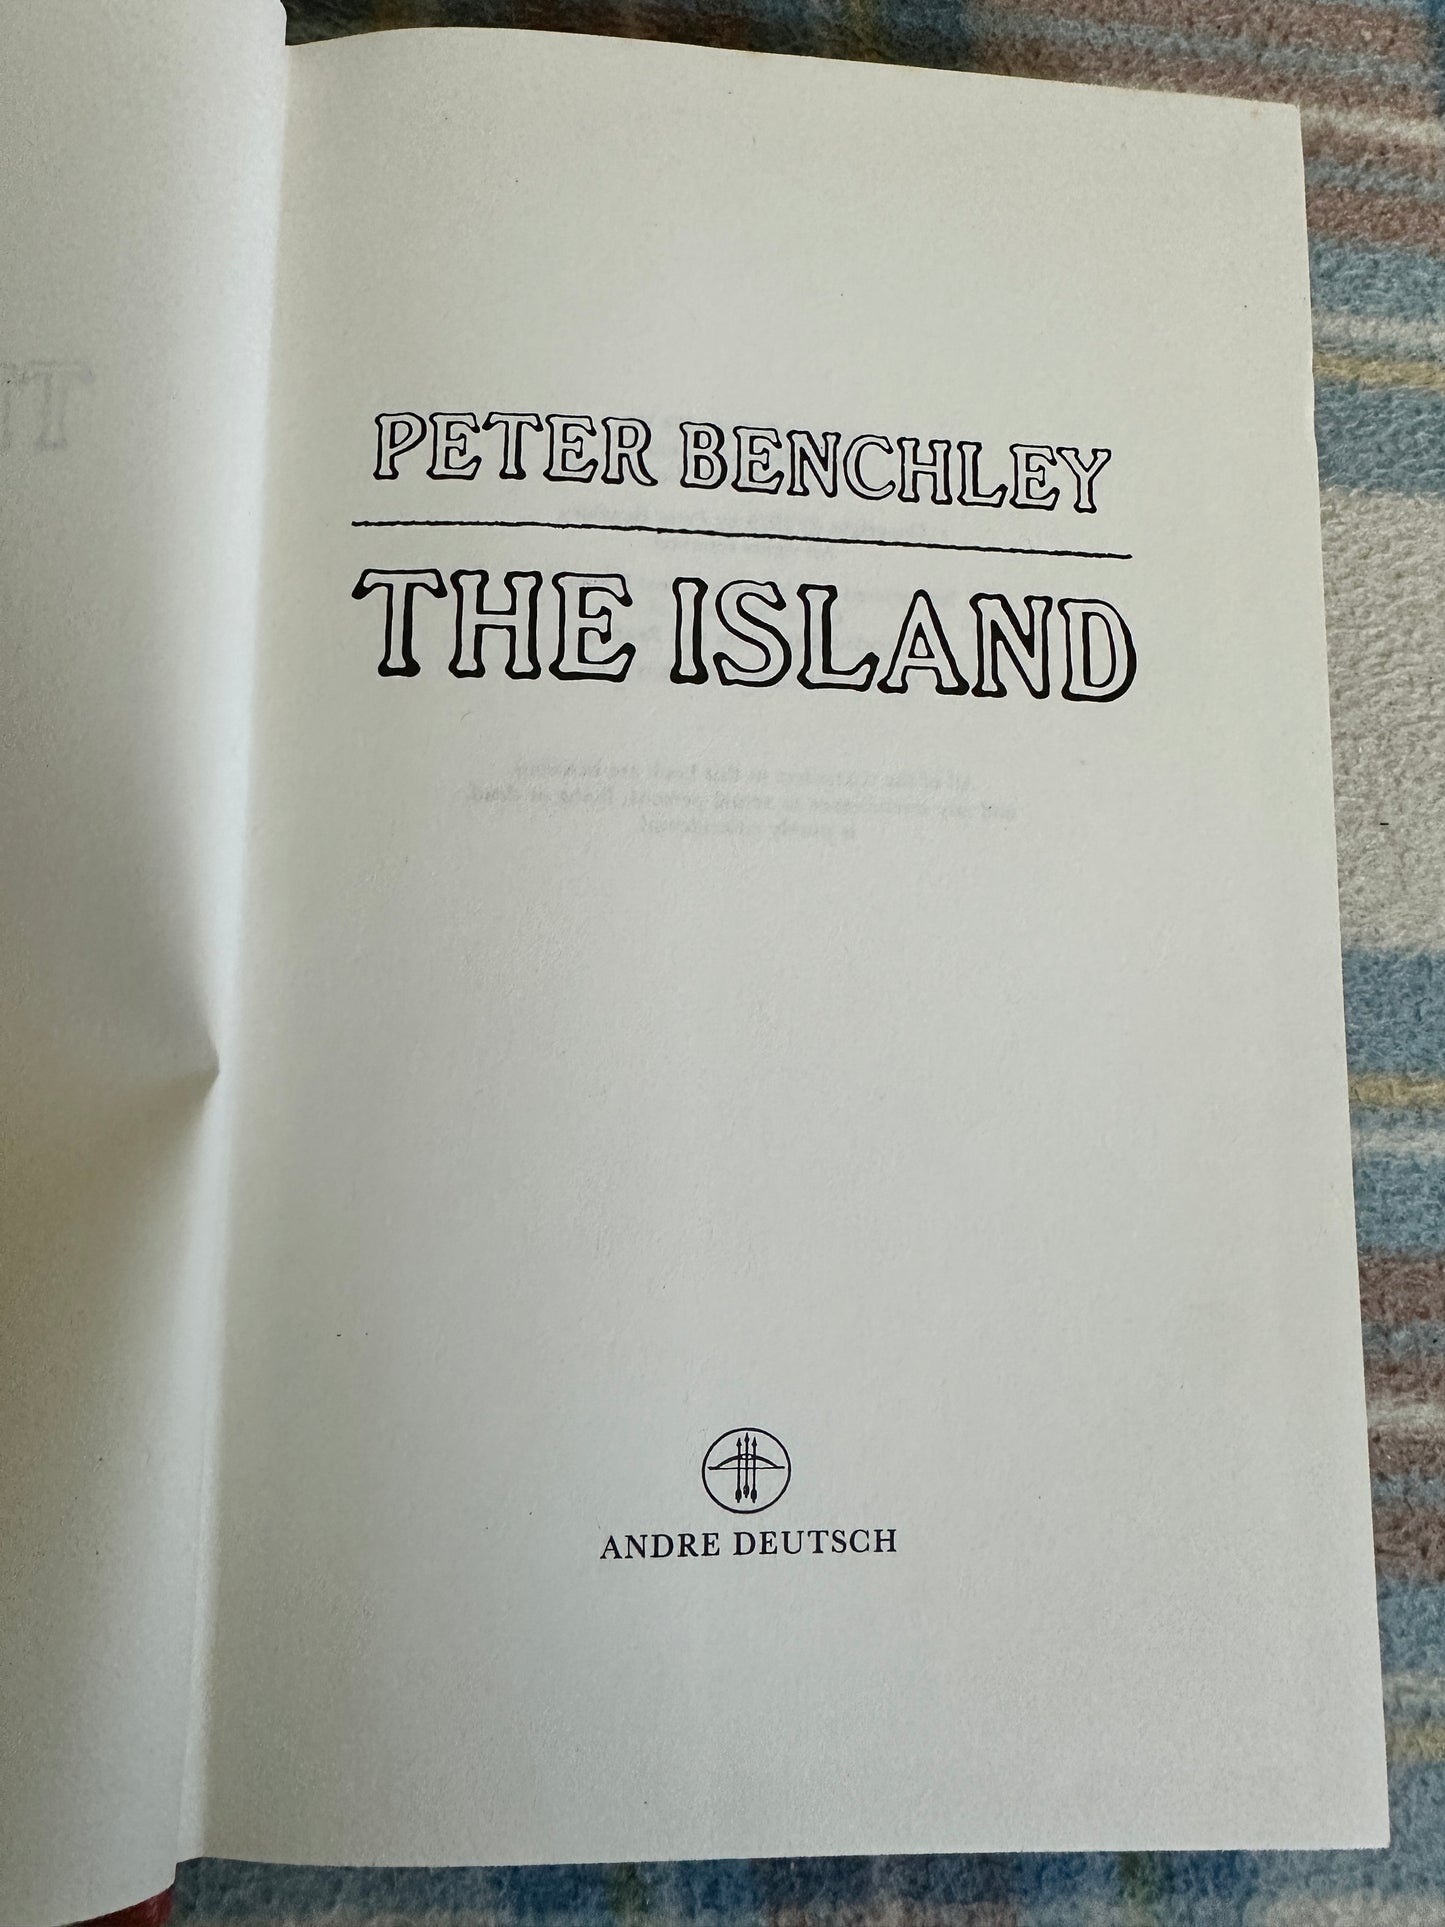 1979*1st* The Island - Peter Benchley(Andre Deutsch)